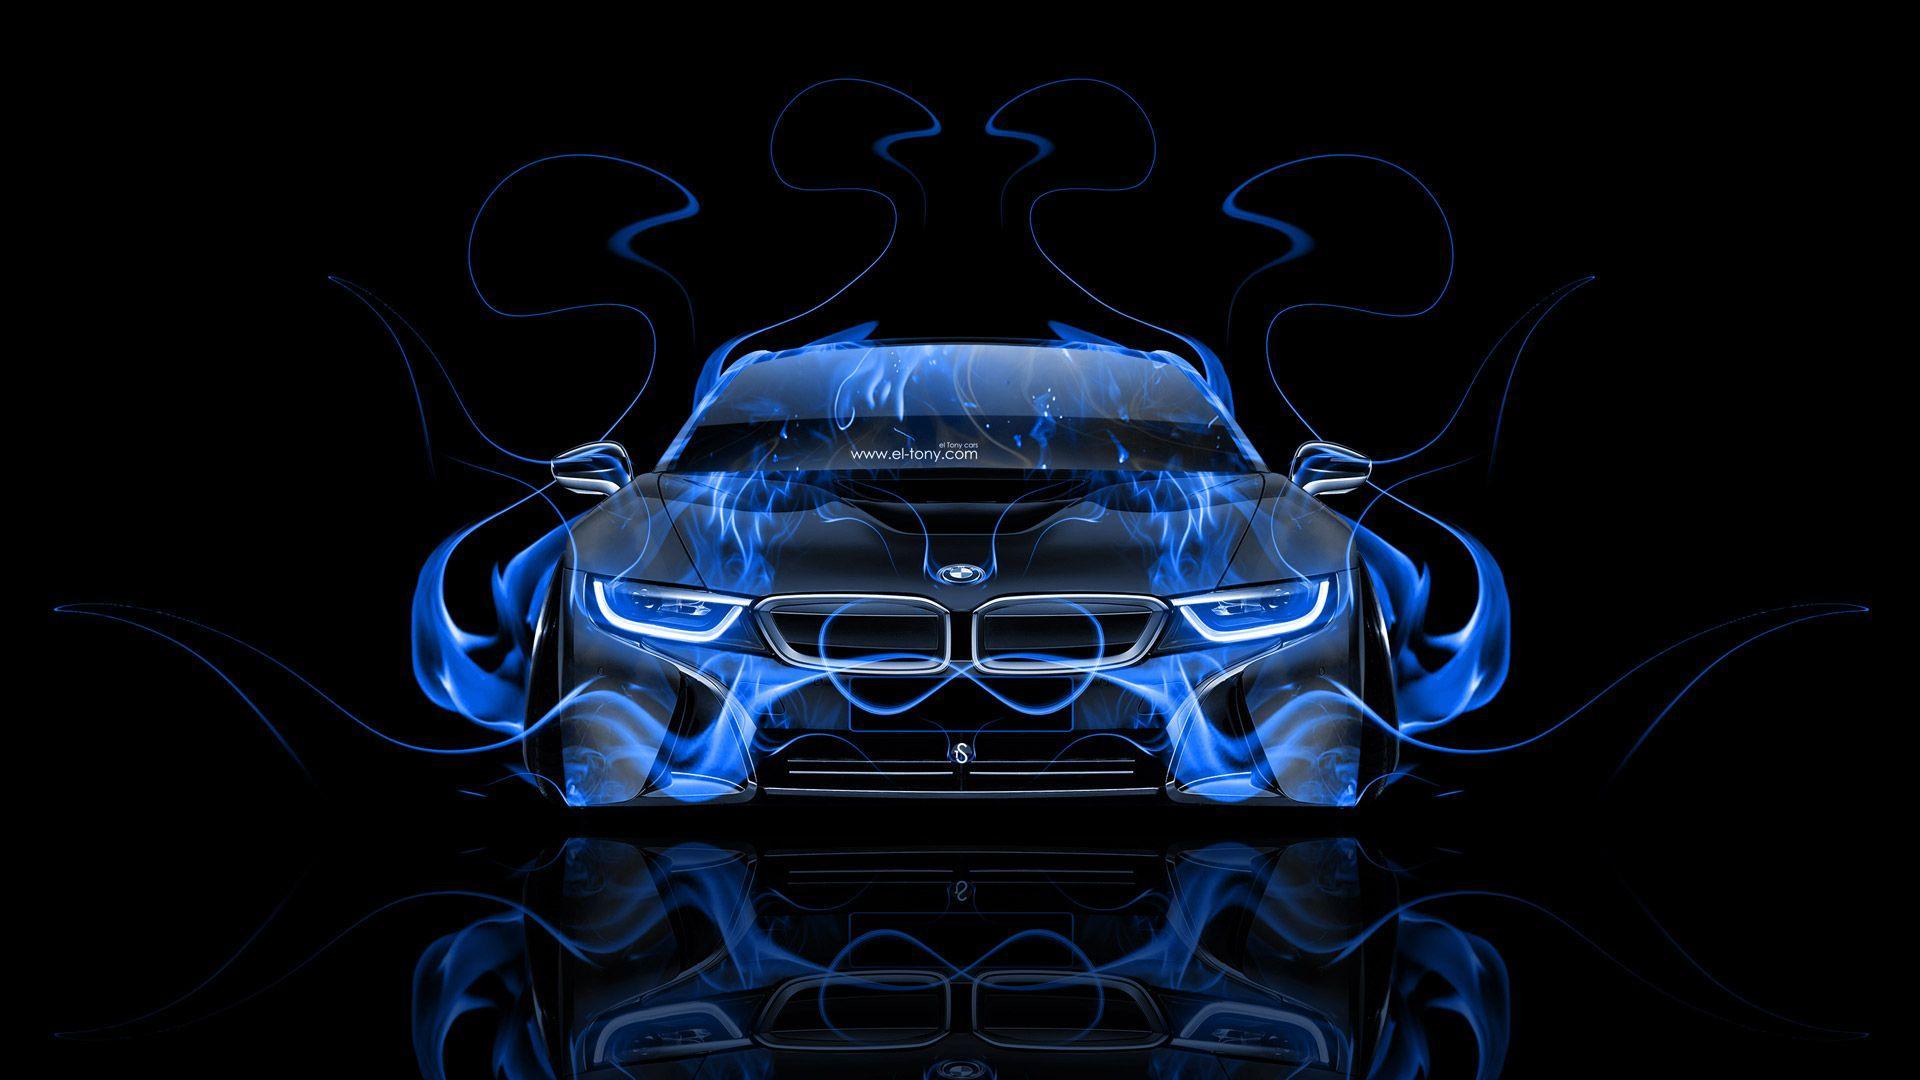 BMW i8 Front Fire Abstract Car 2014